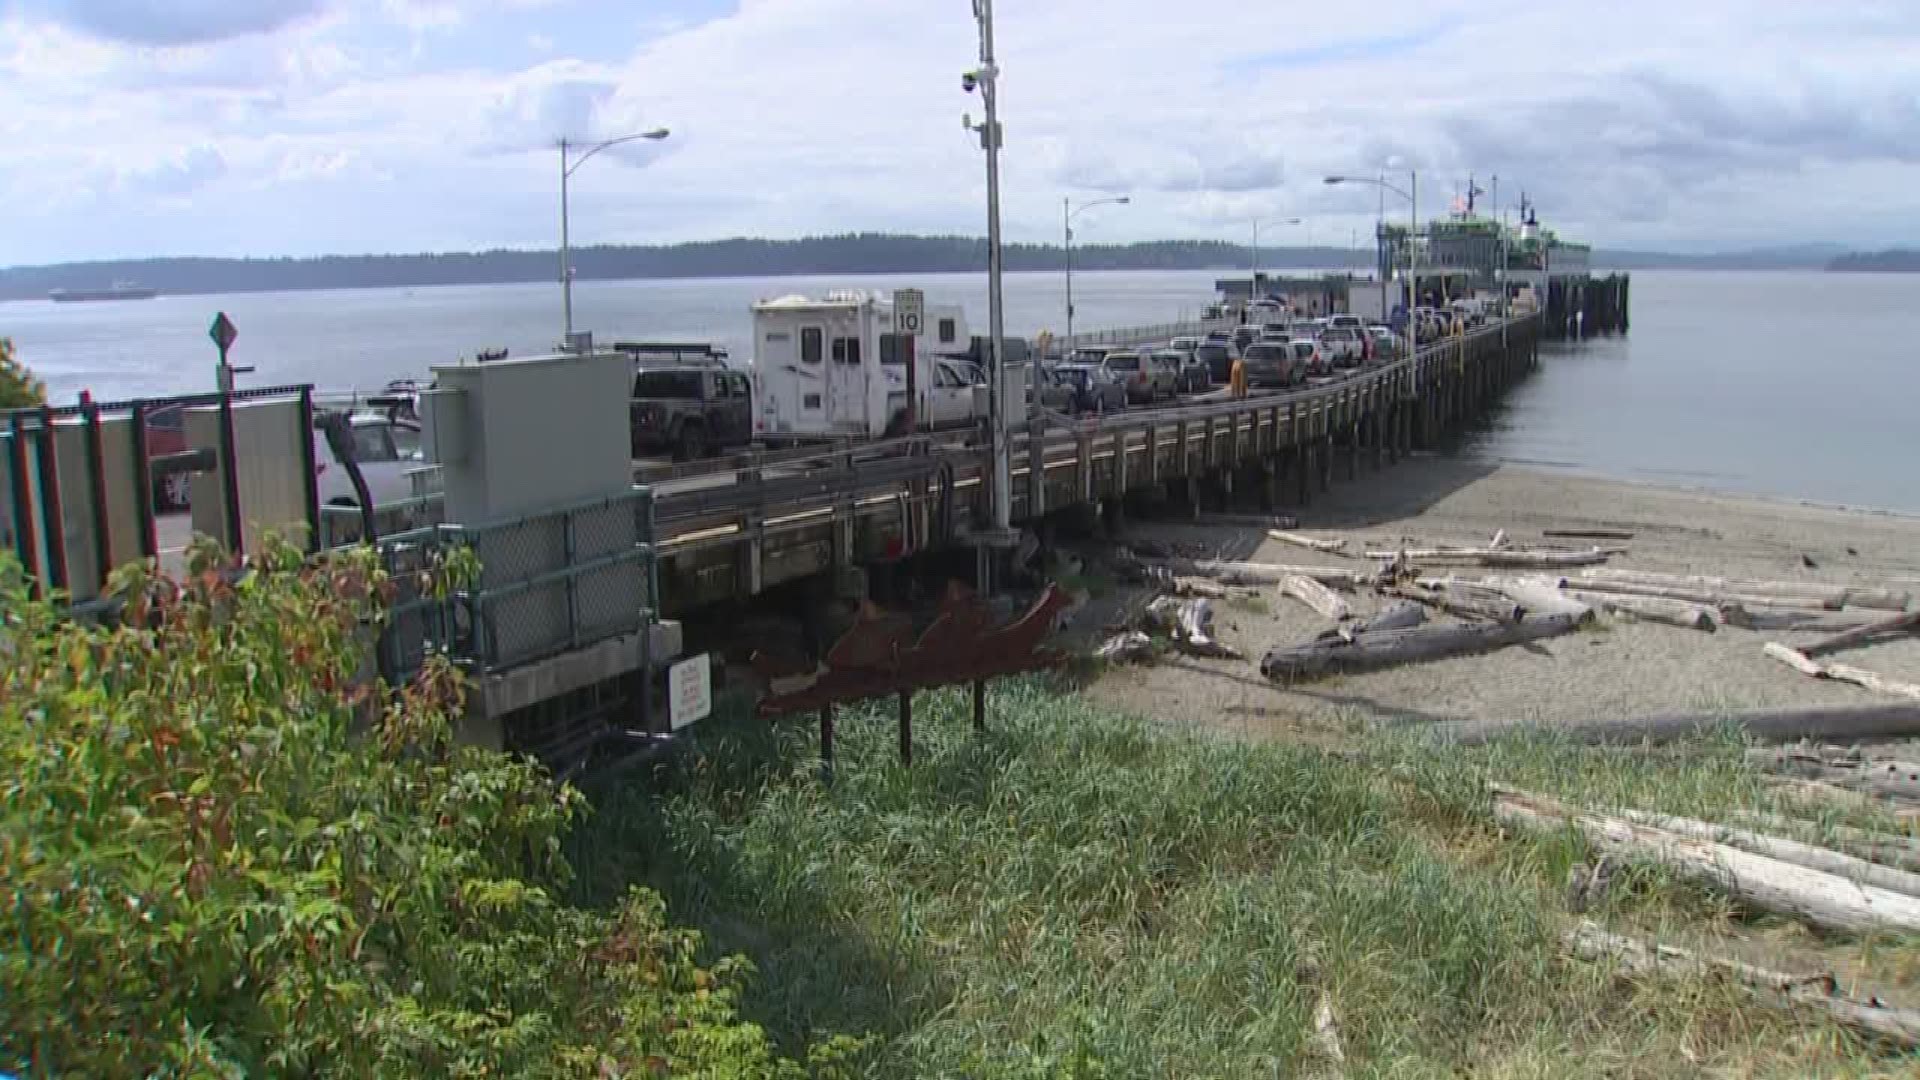 A half-million people are expected to ride a Washington state ferry this Labor Day weekend. Officials are cracking down on line-cutters after a confrontation. KING 5's Michael Crowe reports.